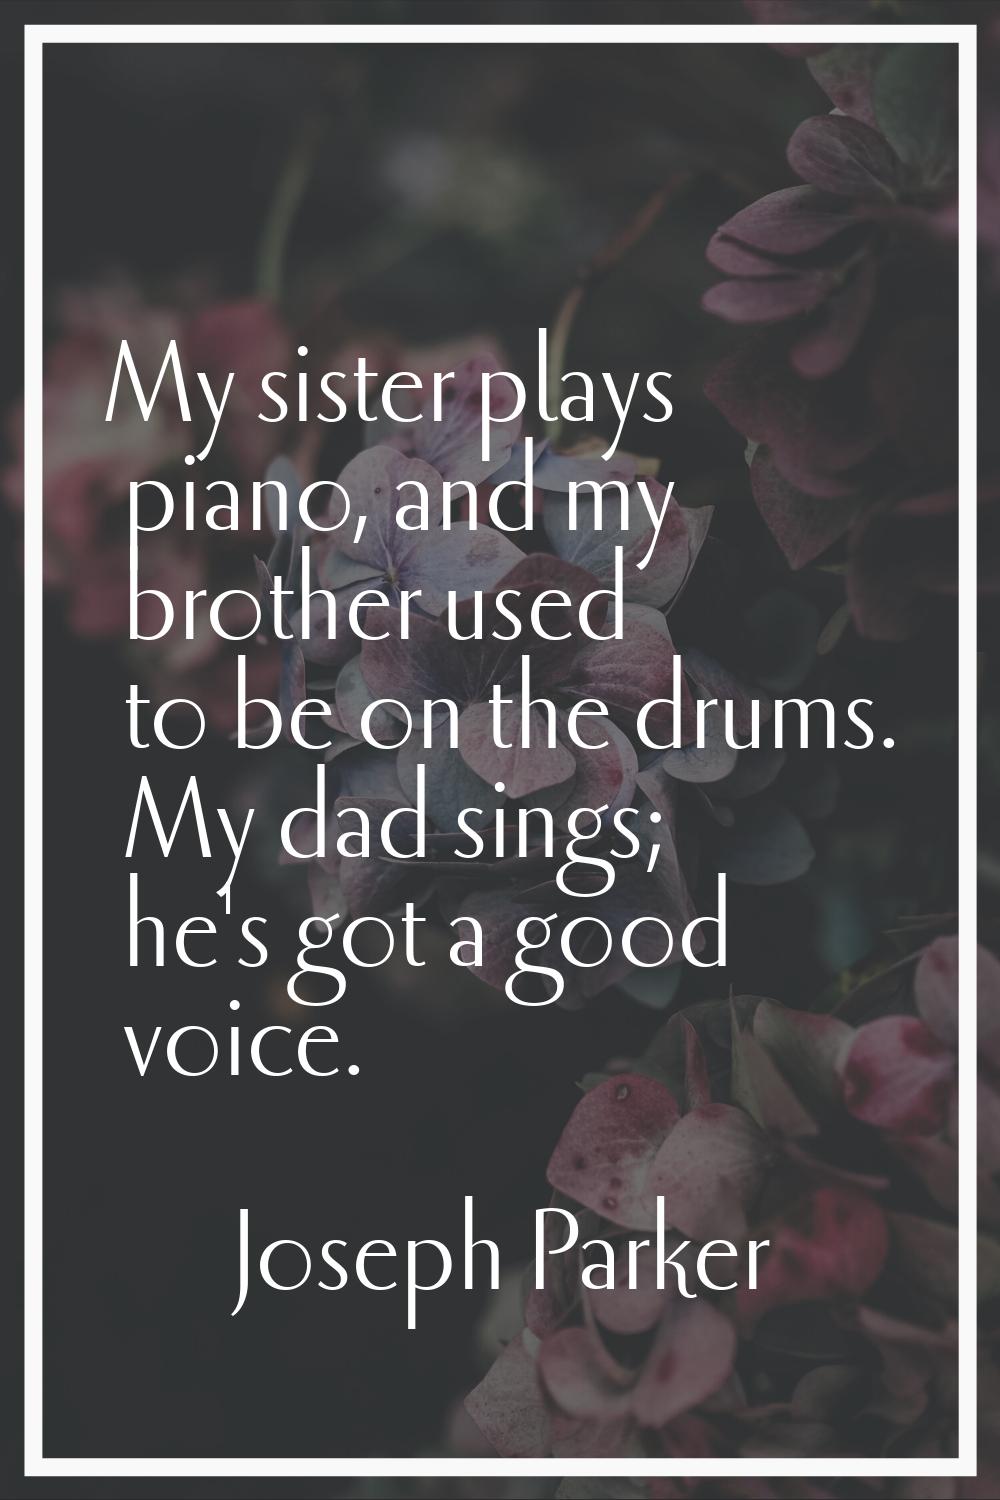 My sister plays piano, and my brother used to be on the drums. My dad sings; he's got a good voice.